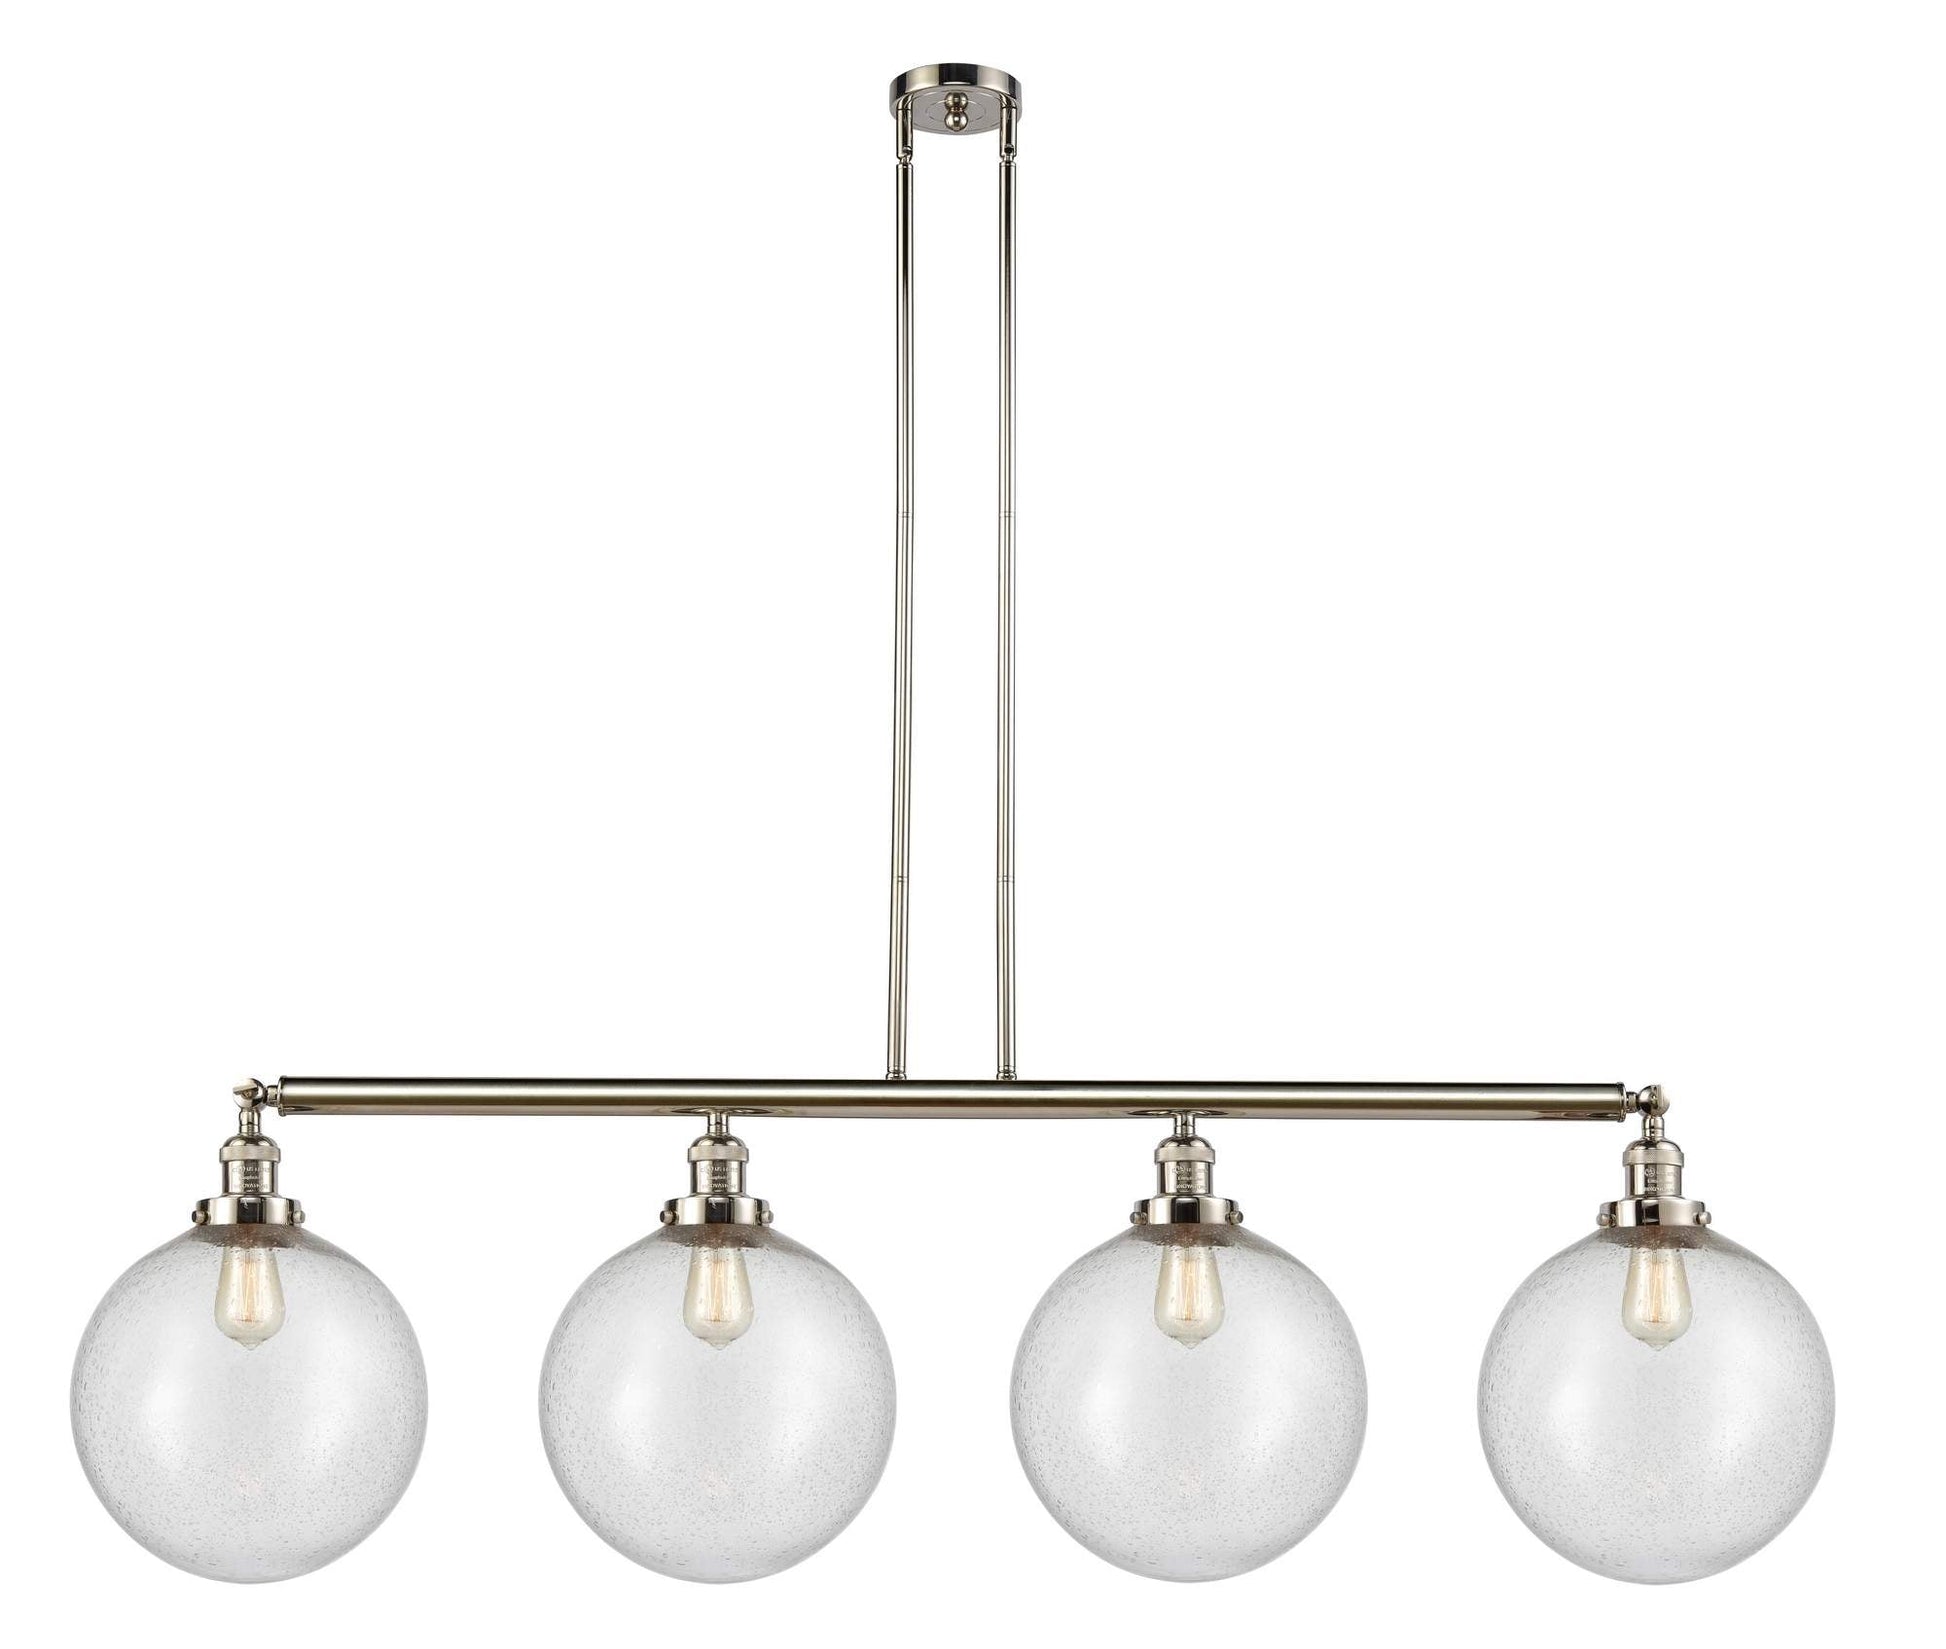 214-PN-G204-12 4-Light 56" Polished Nickel Island Light - Seedy Beacon Glass - LED Bulb - Dimmensions: 56 x 12 x 16<br>Minimum Height : 26<br>Maximum Height : 50 - Sloped Ceiling Compatible: Yes